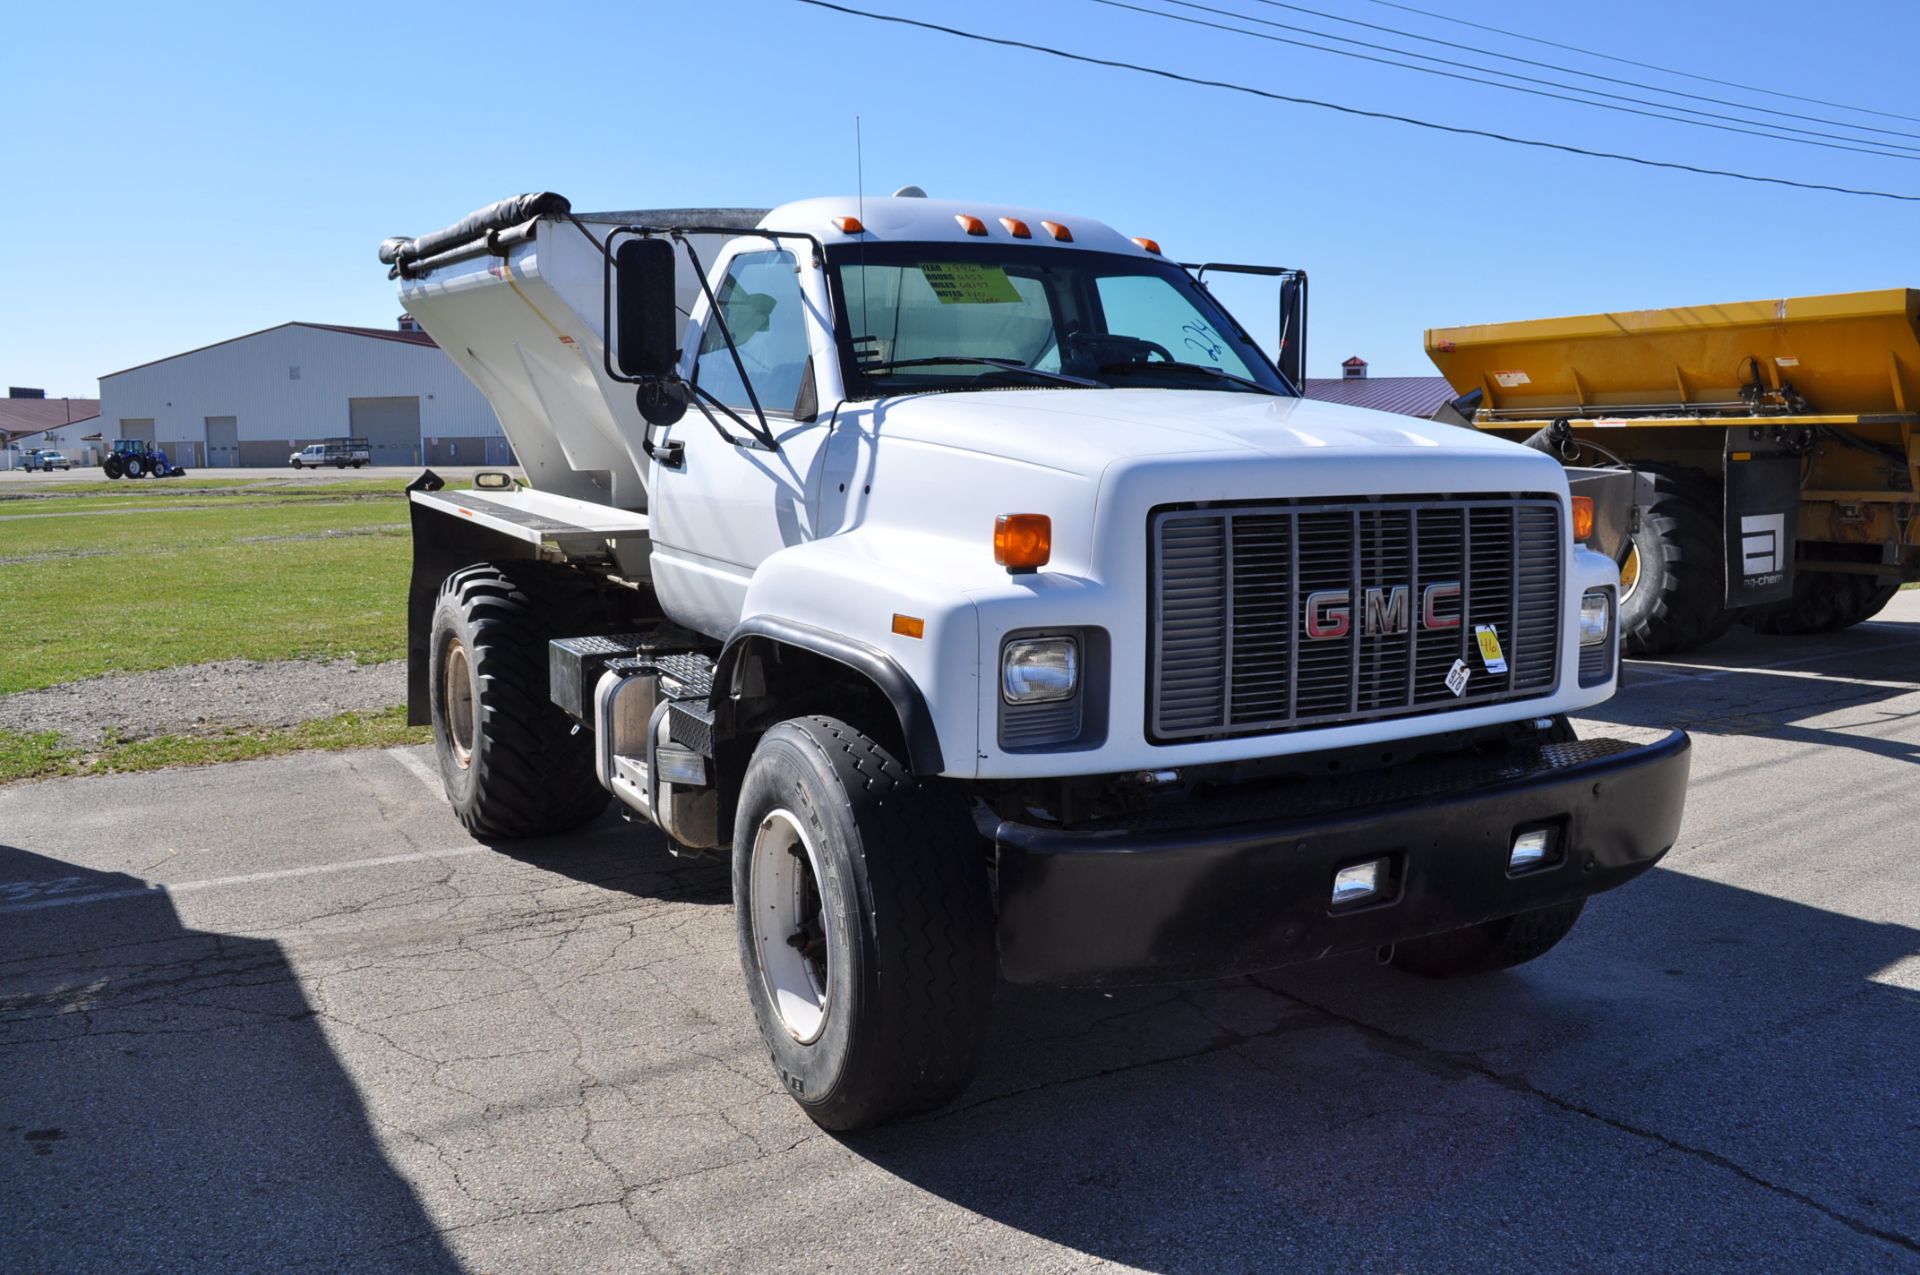 1996 GMC Field Gymmy, New Leader L22-20 G4 spinner bed, Cat engine, auto trans, GSC 1000 controller - Image 4 of 11